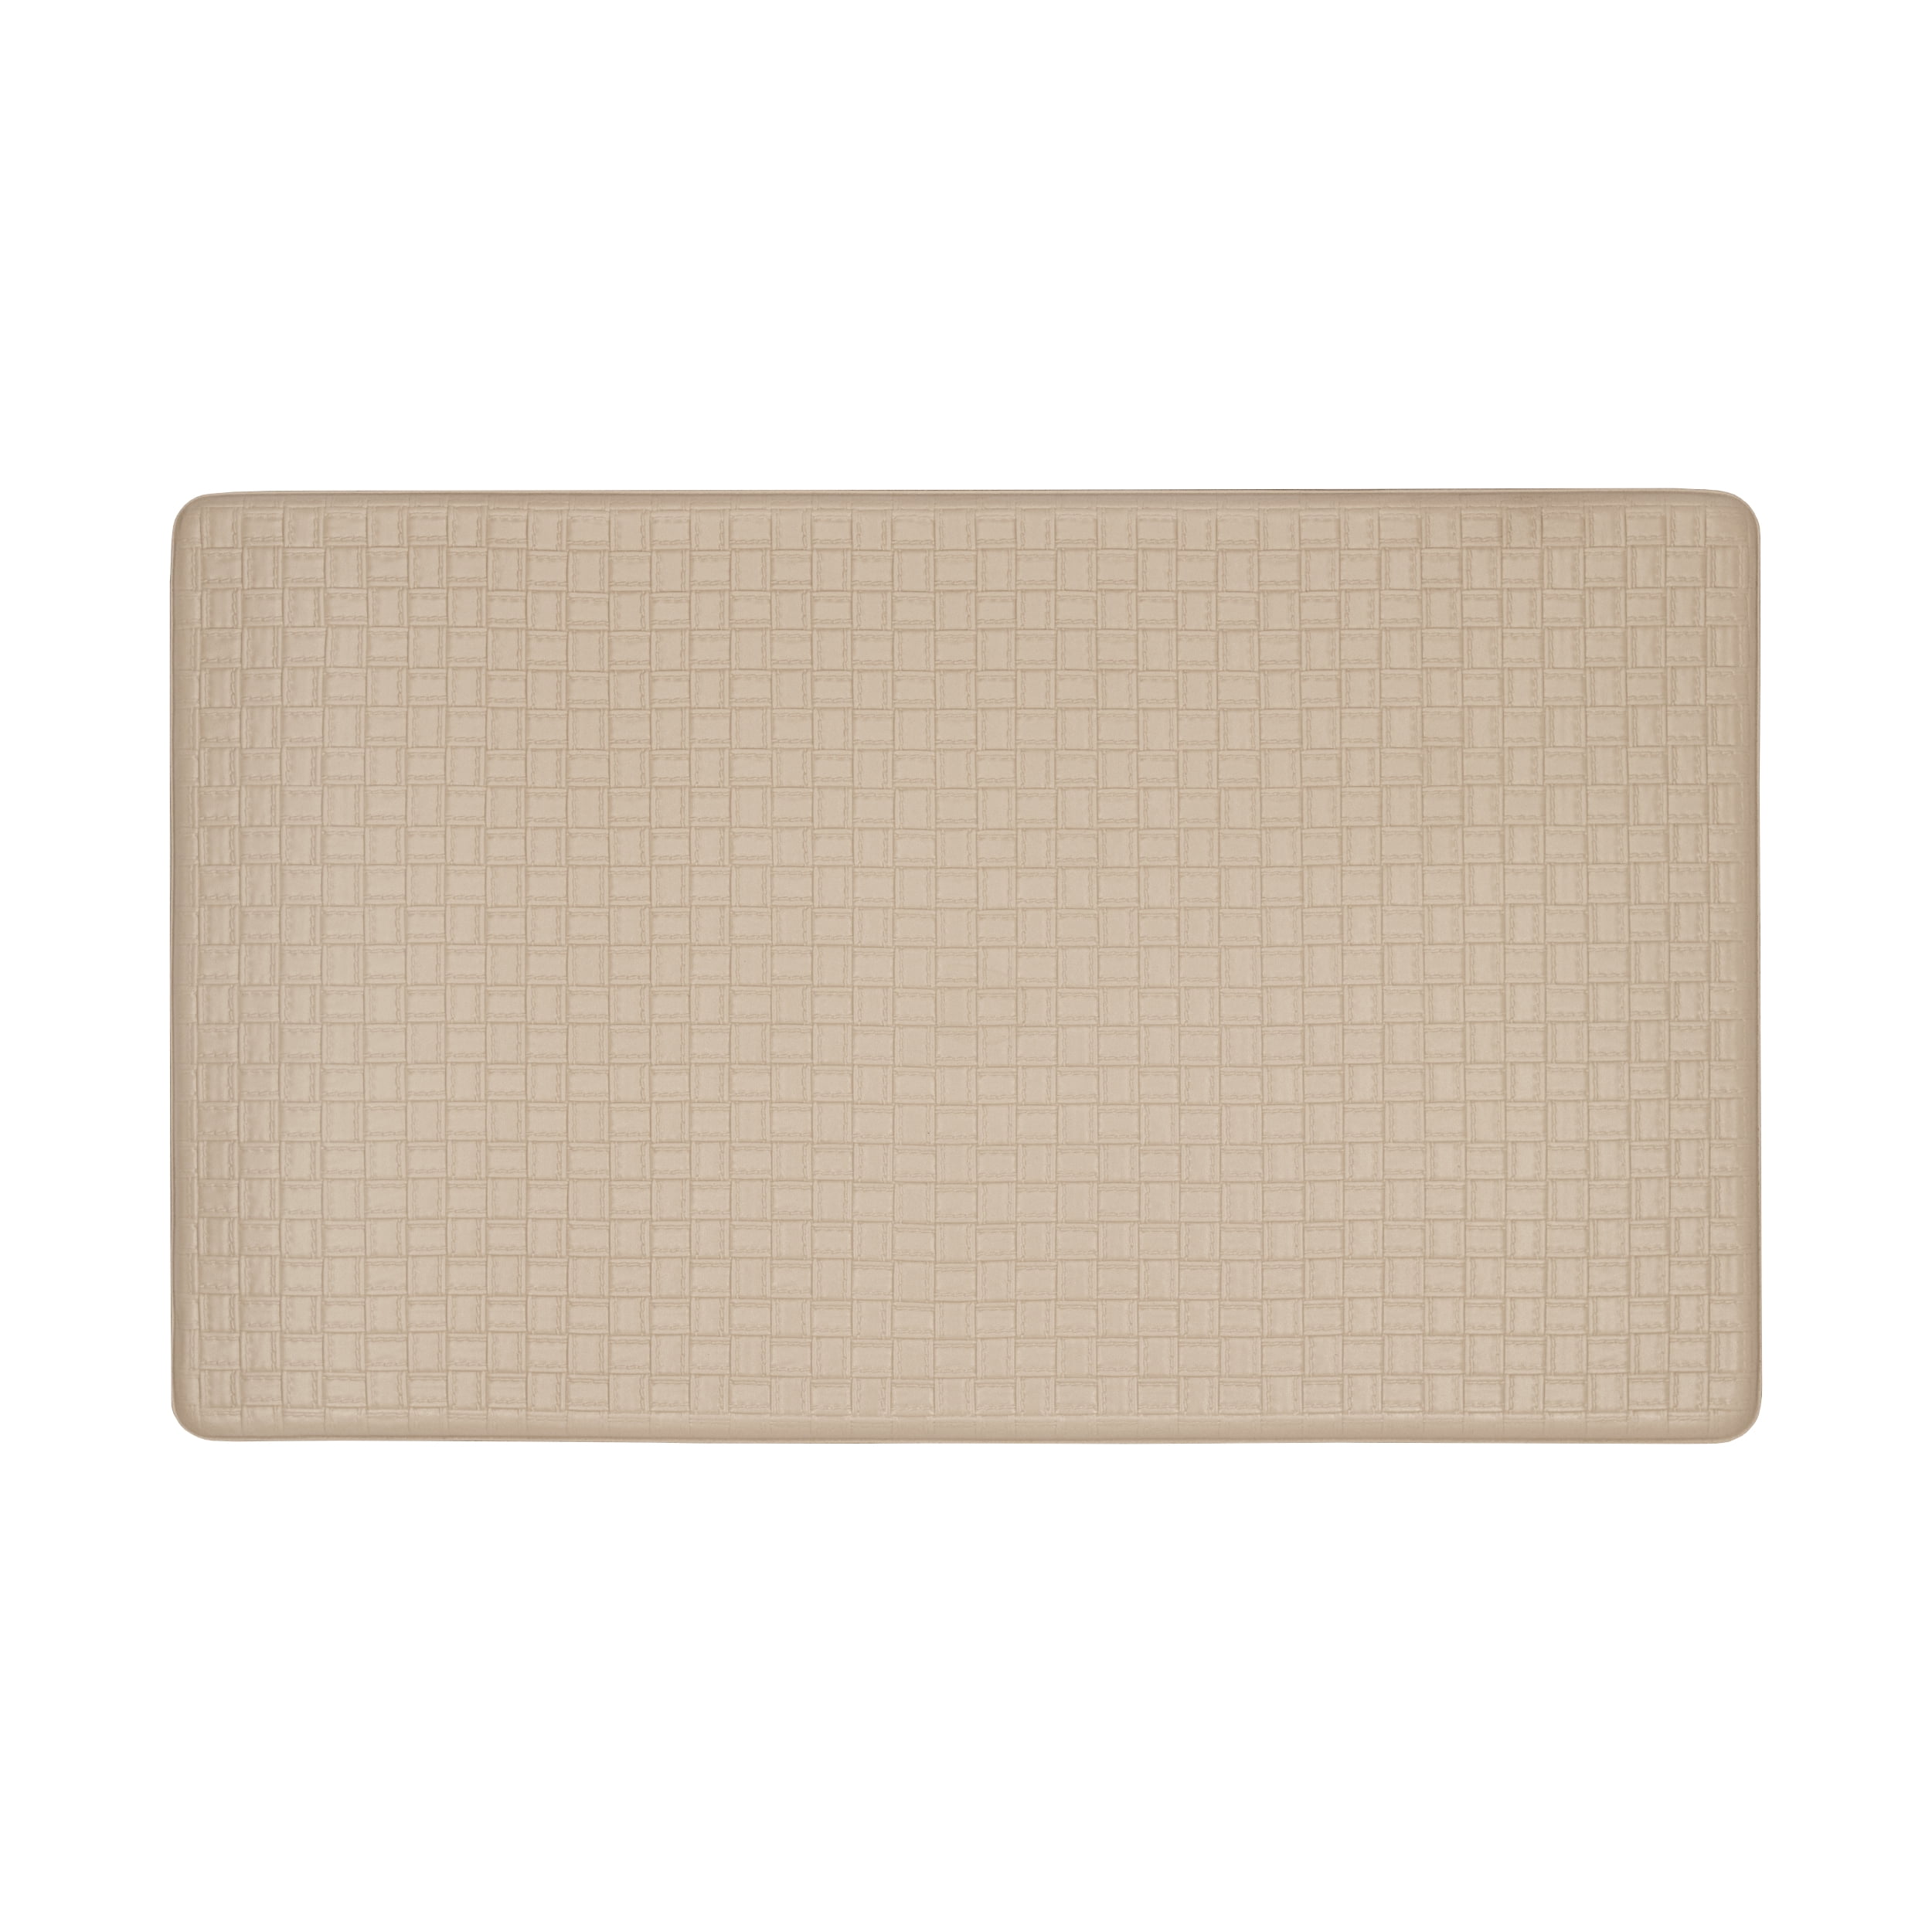 Picture of Achim AF1830TN12 18 x 30 in. Woven-Embossed Faux-Leather Anti-Fatigue Mat, Tan